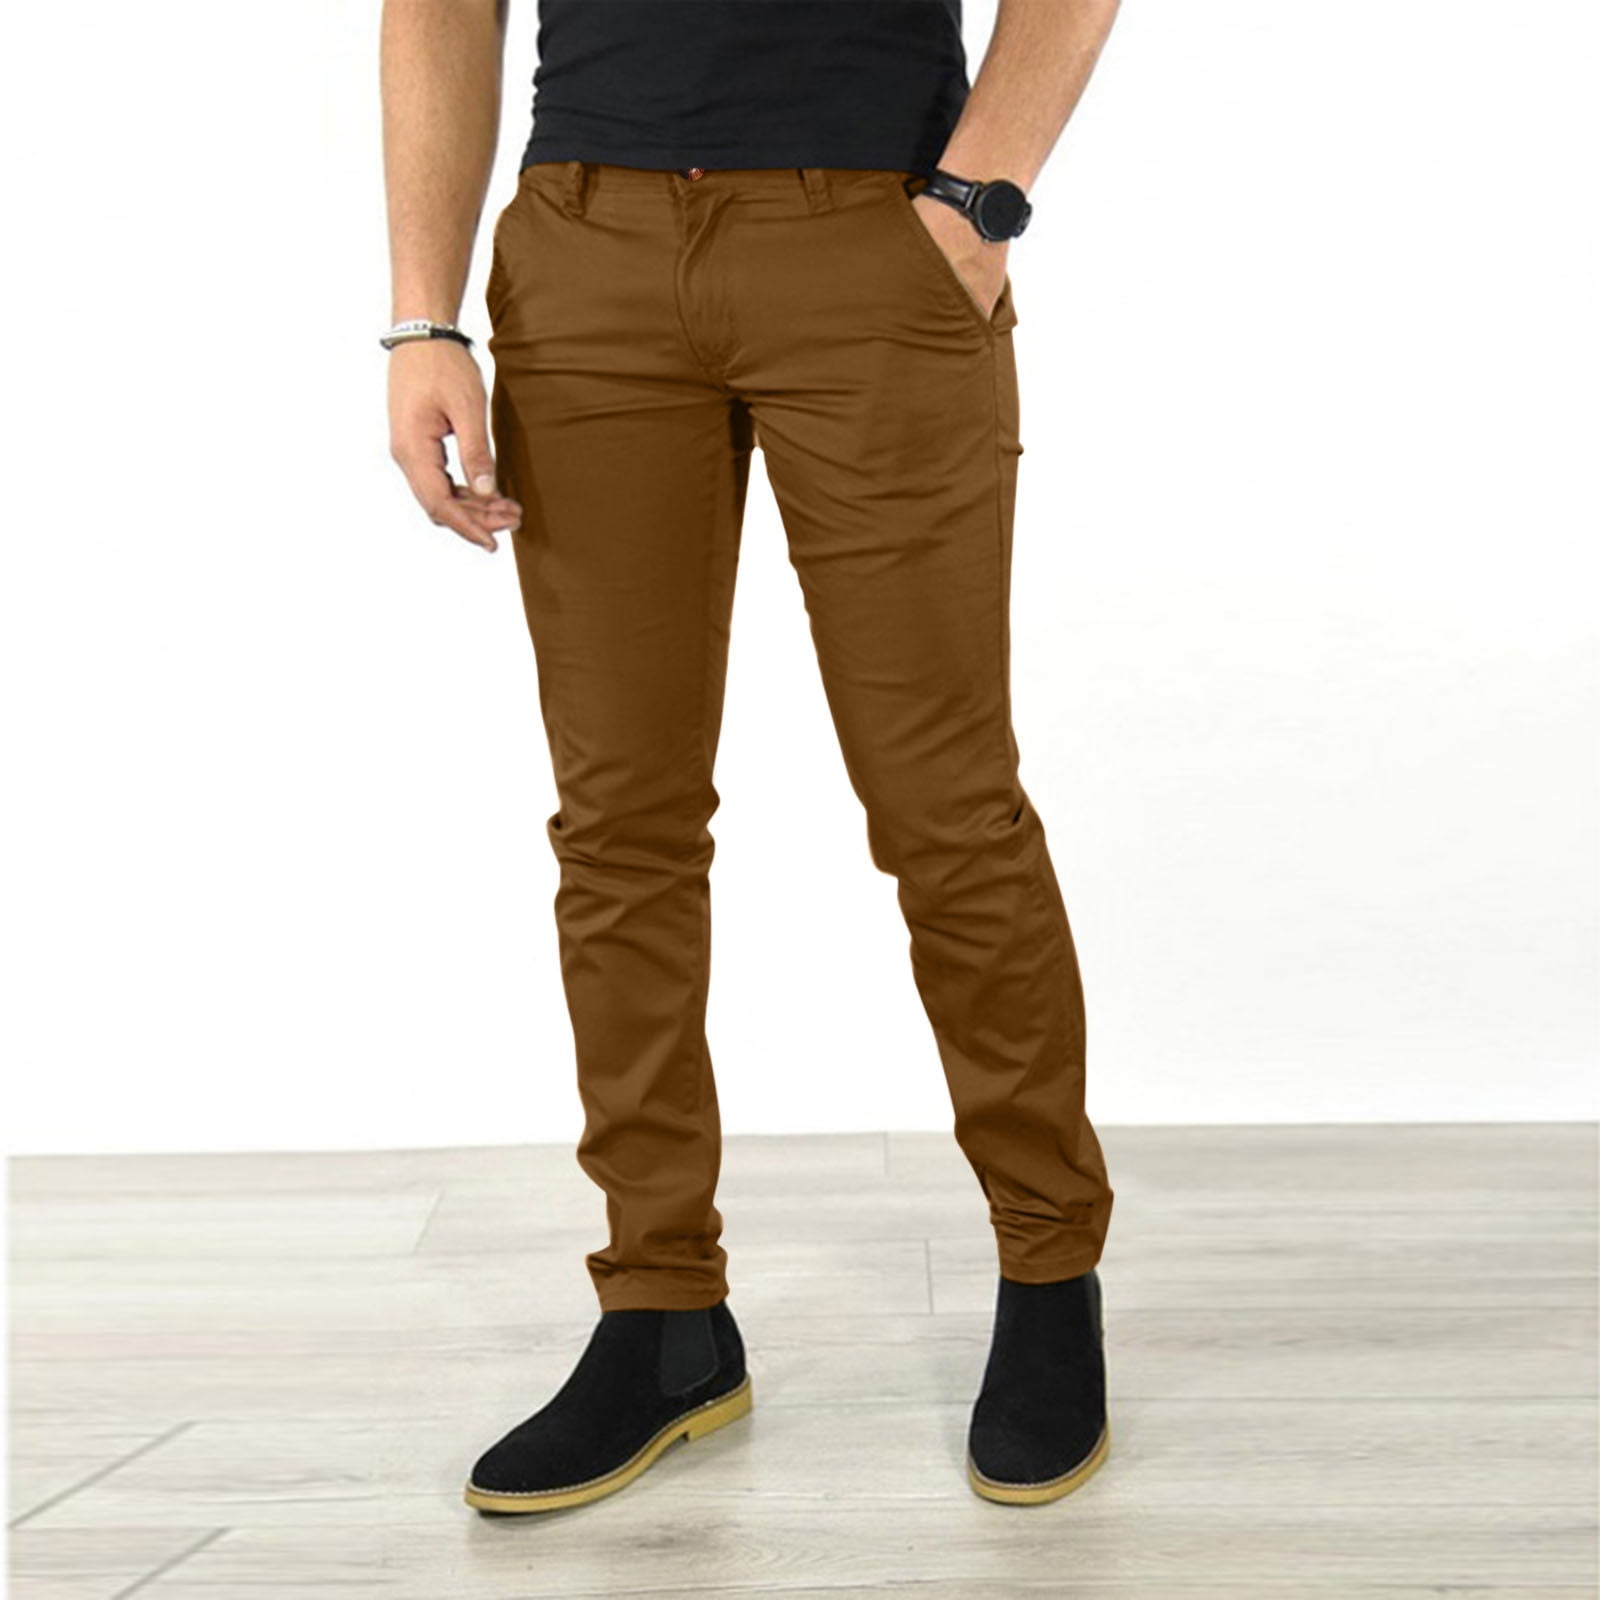 Brown Sweatpants For Men Male Casual Business Solid Slim Pants Zipper Fly  Pocket Cropped Pencil Pant Trousers 